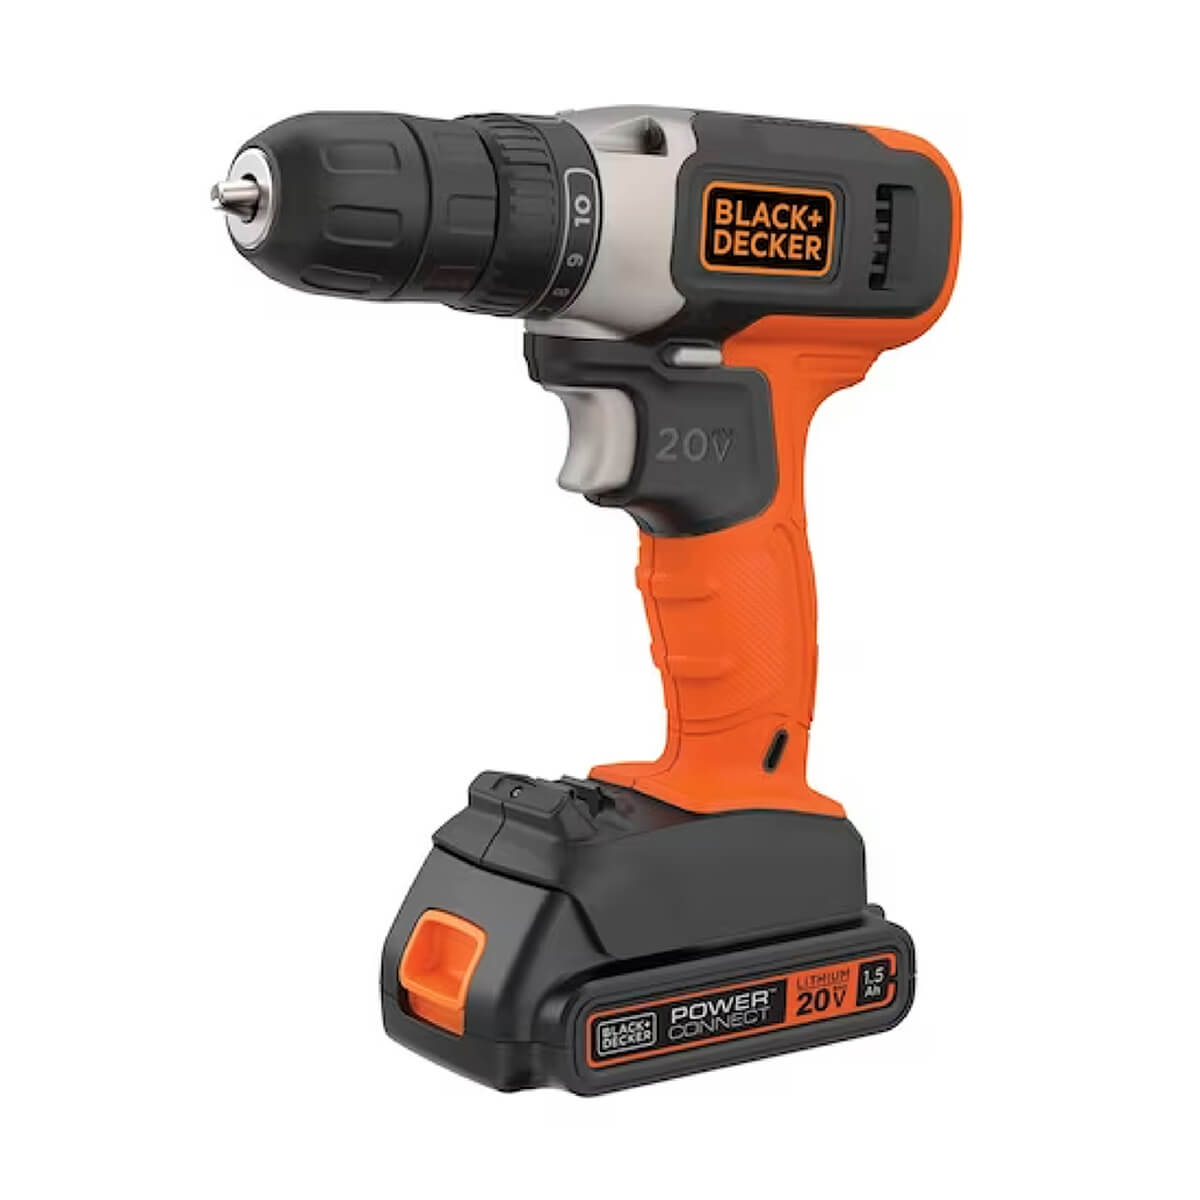 Black and Decker 20V Max Lithium-Ion Cordless Drill/Driver with Battery & Charger